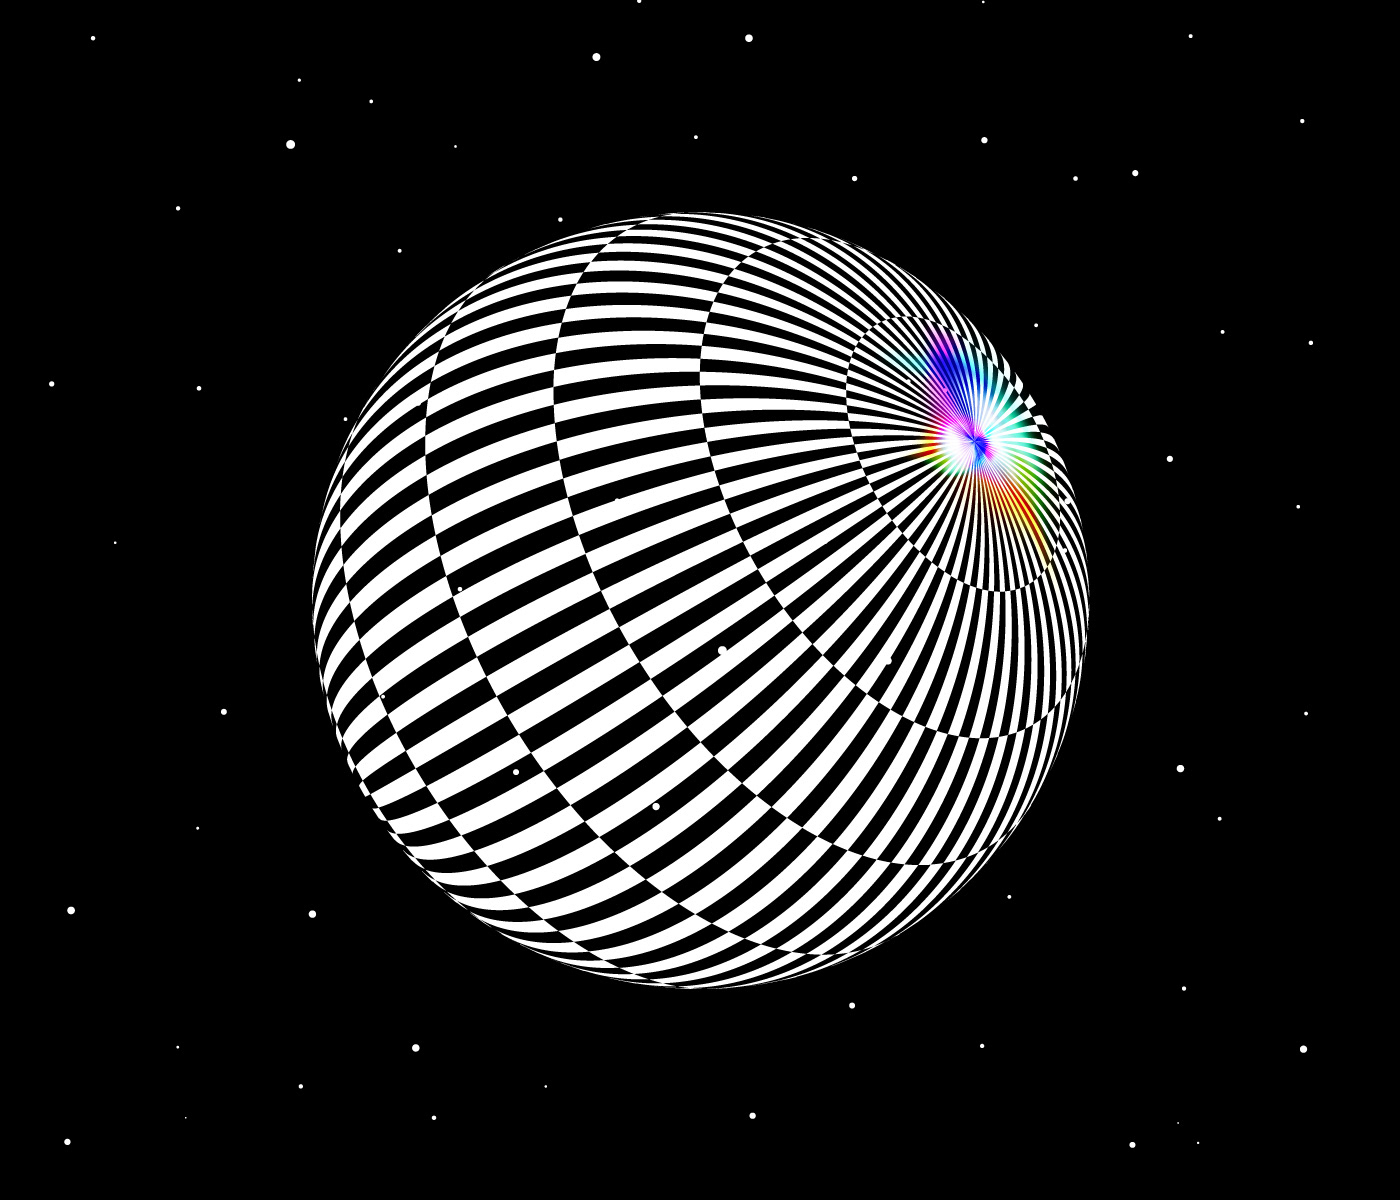 op art black white pattern opart abstract symbol optical illusion visual effect illusion sign